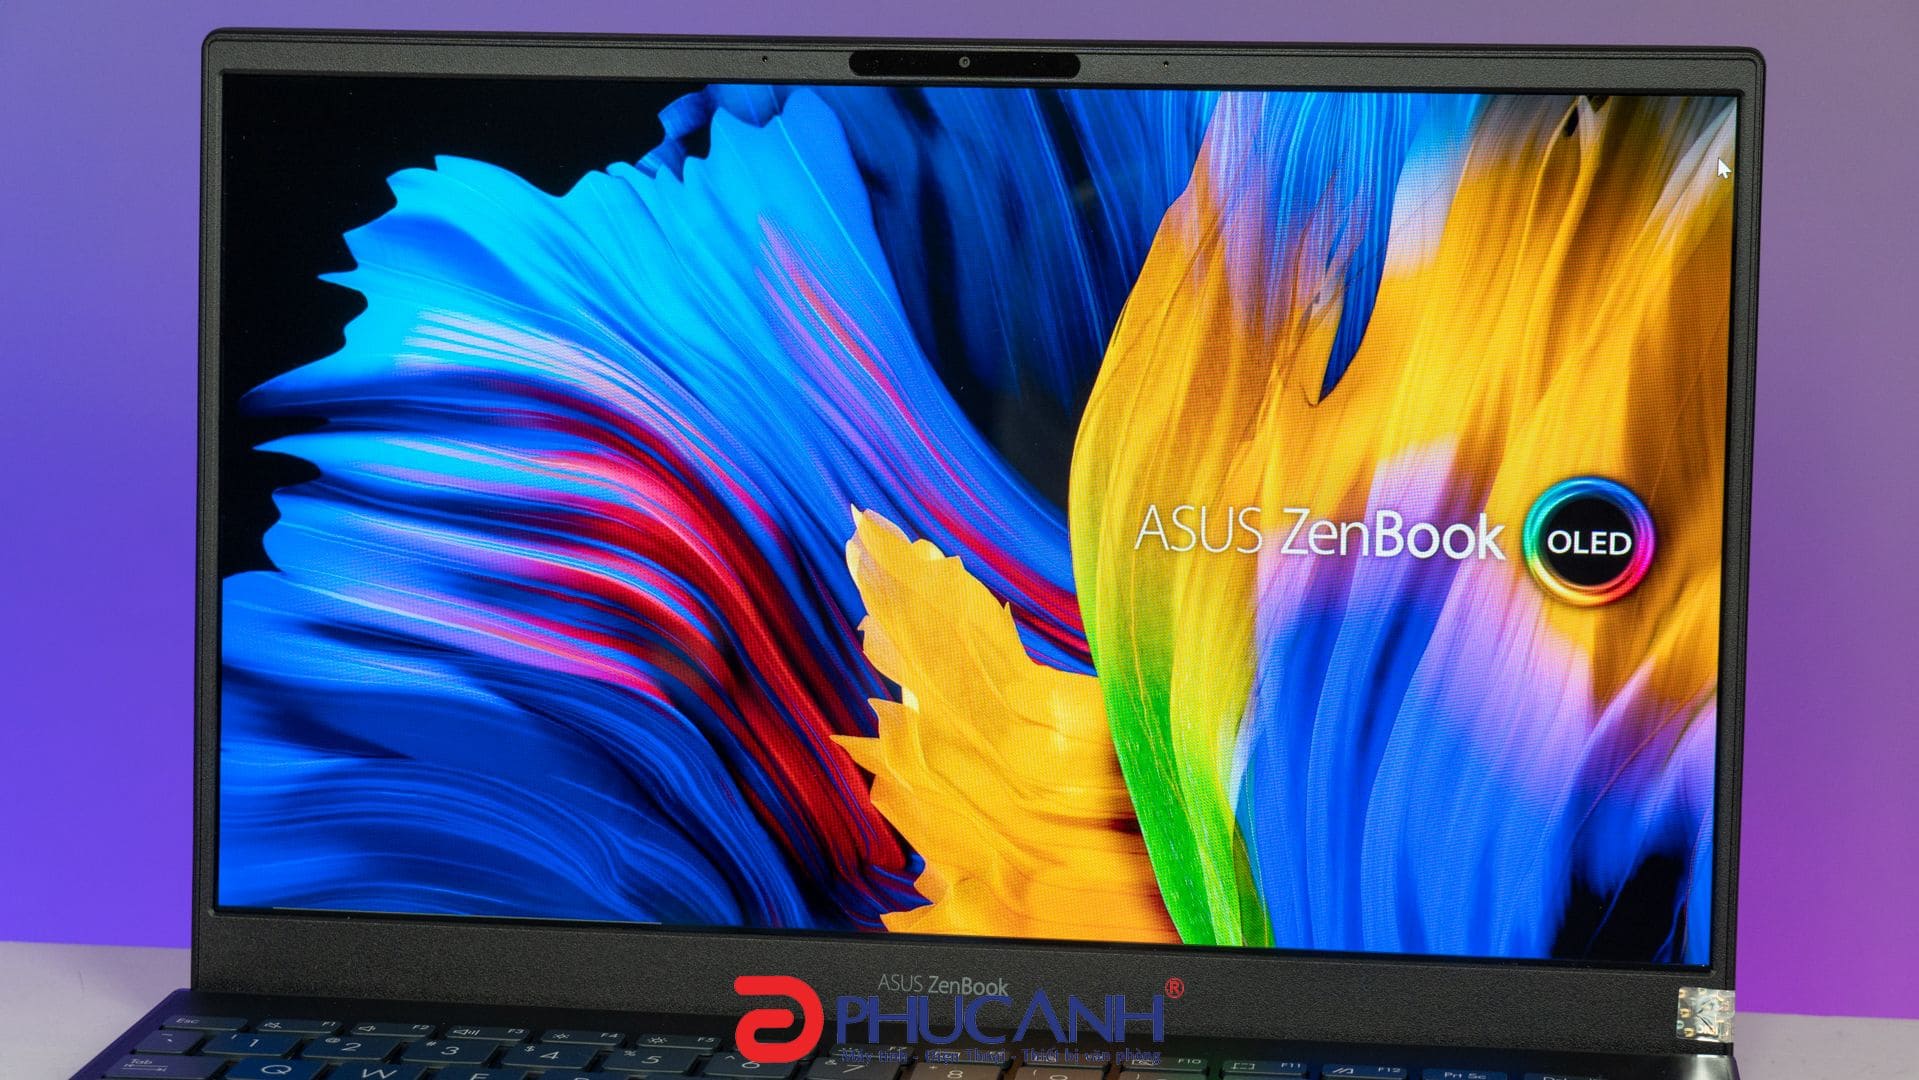 Phin Sex13 Tuoi - Review] Asus Zenbook UX325EA OLED - MÃ¡y xá»‹n, mÃ n ngon, tráº£i nghiá»‡m cá»±c Ä‘á»‰nh